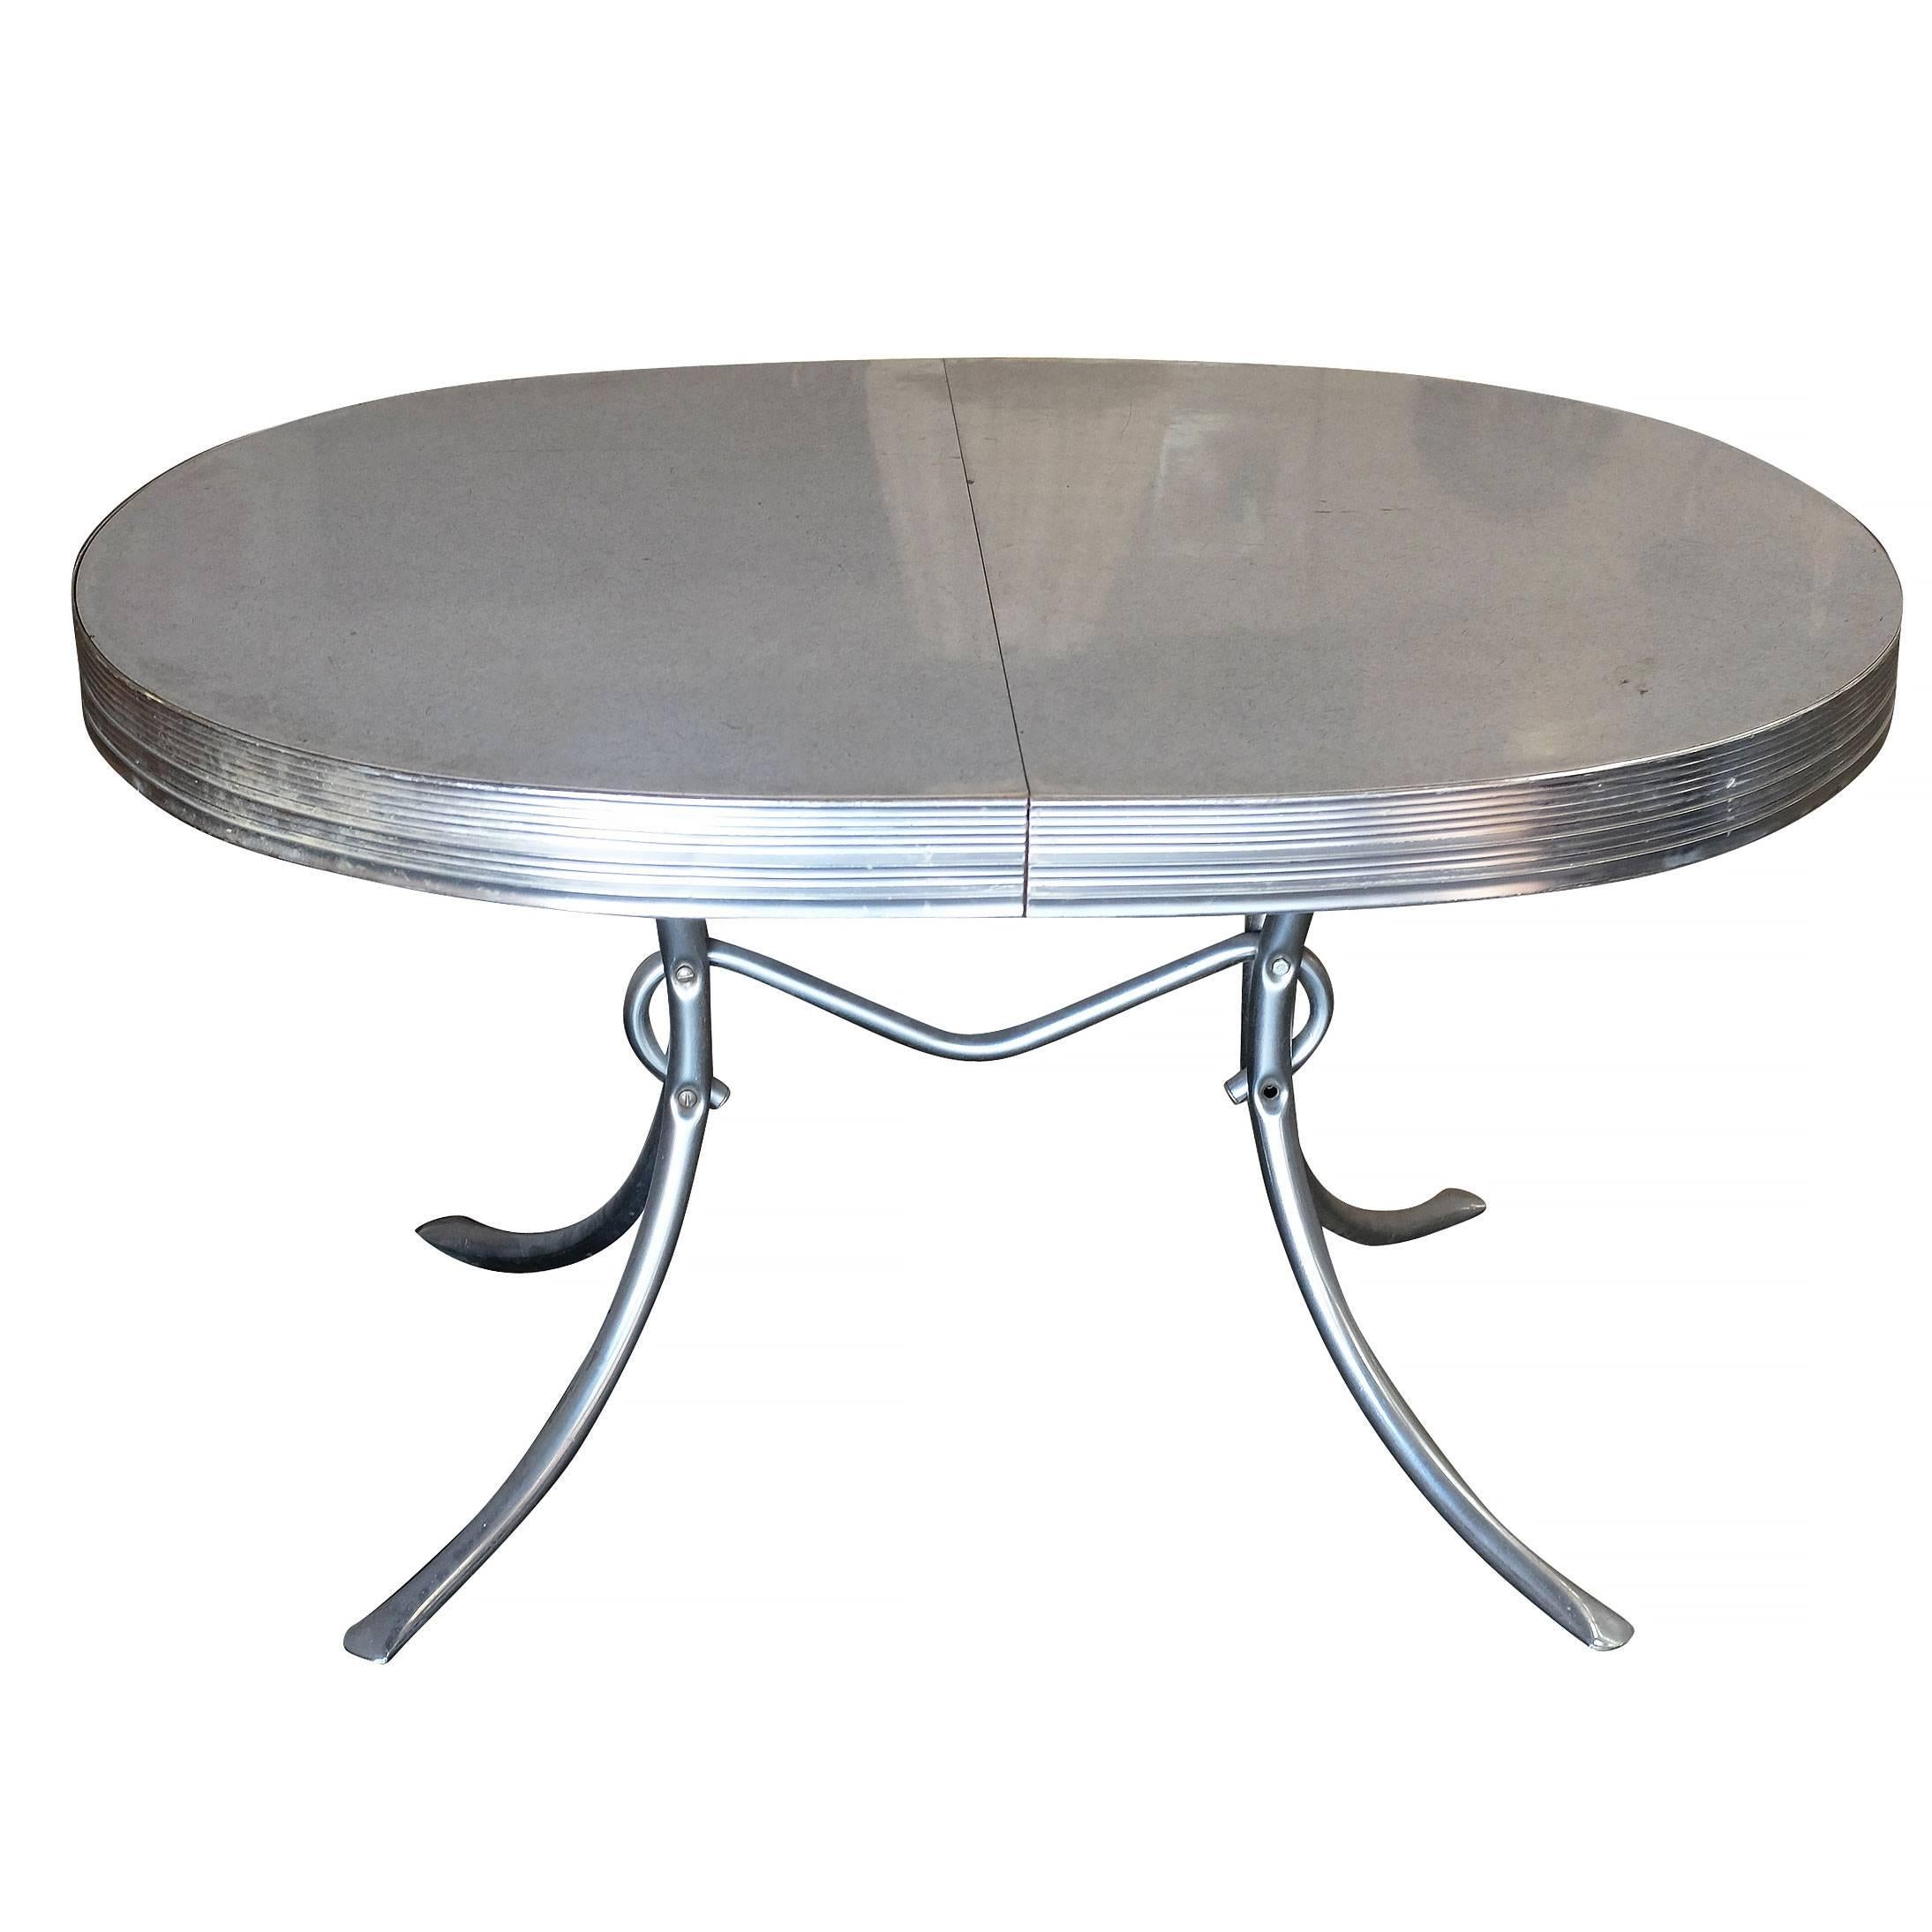 value of 1960s chrome and formica table